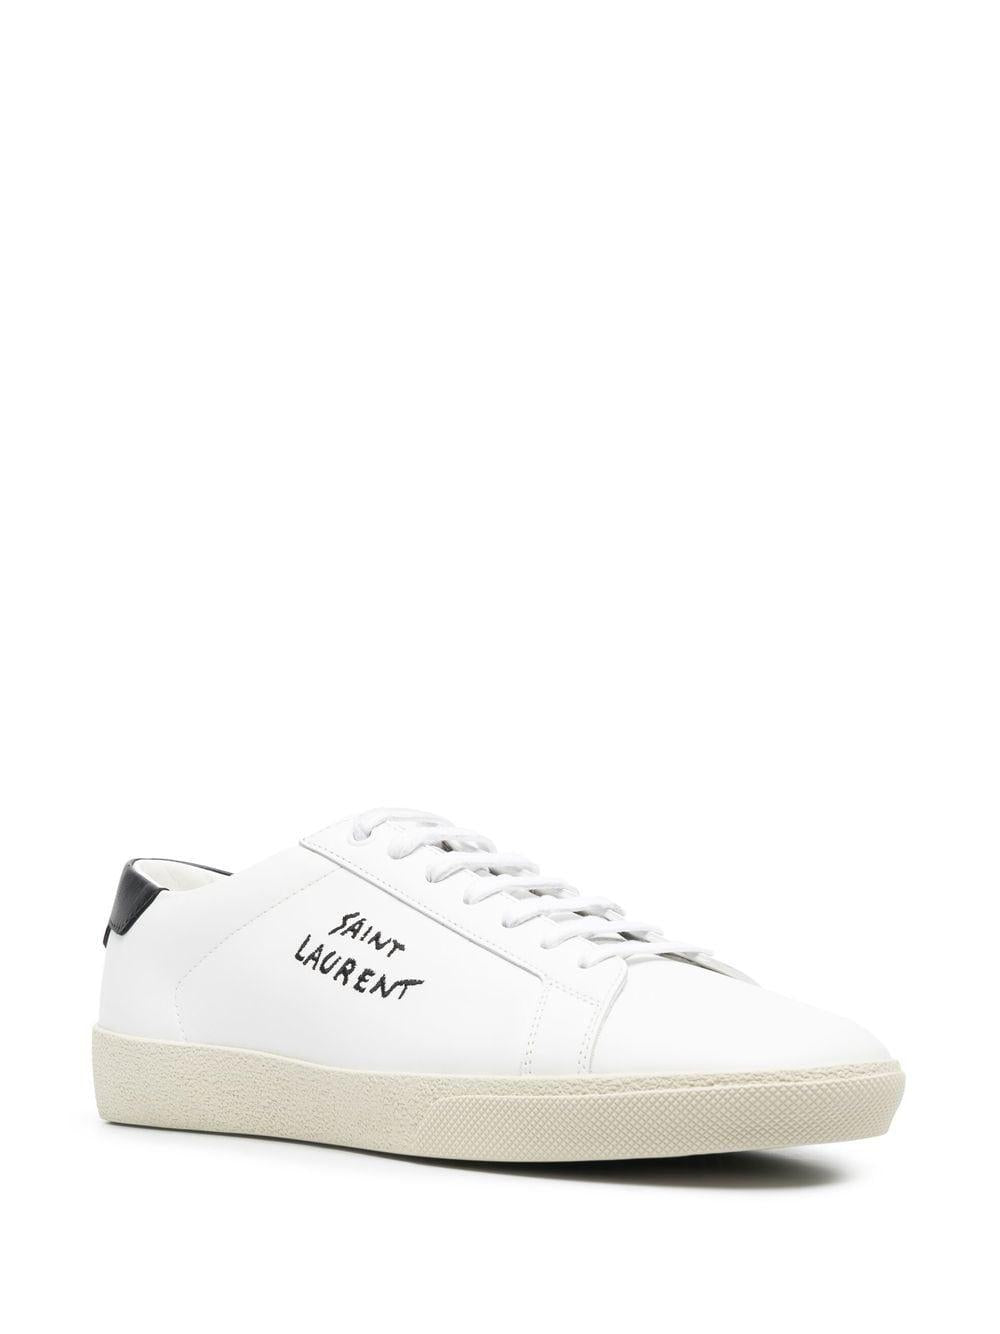 Men's White Court Sneakers with Saint Laurent Detail and Rubber Sole